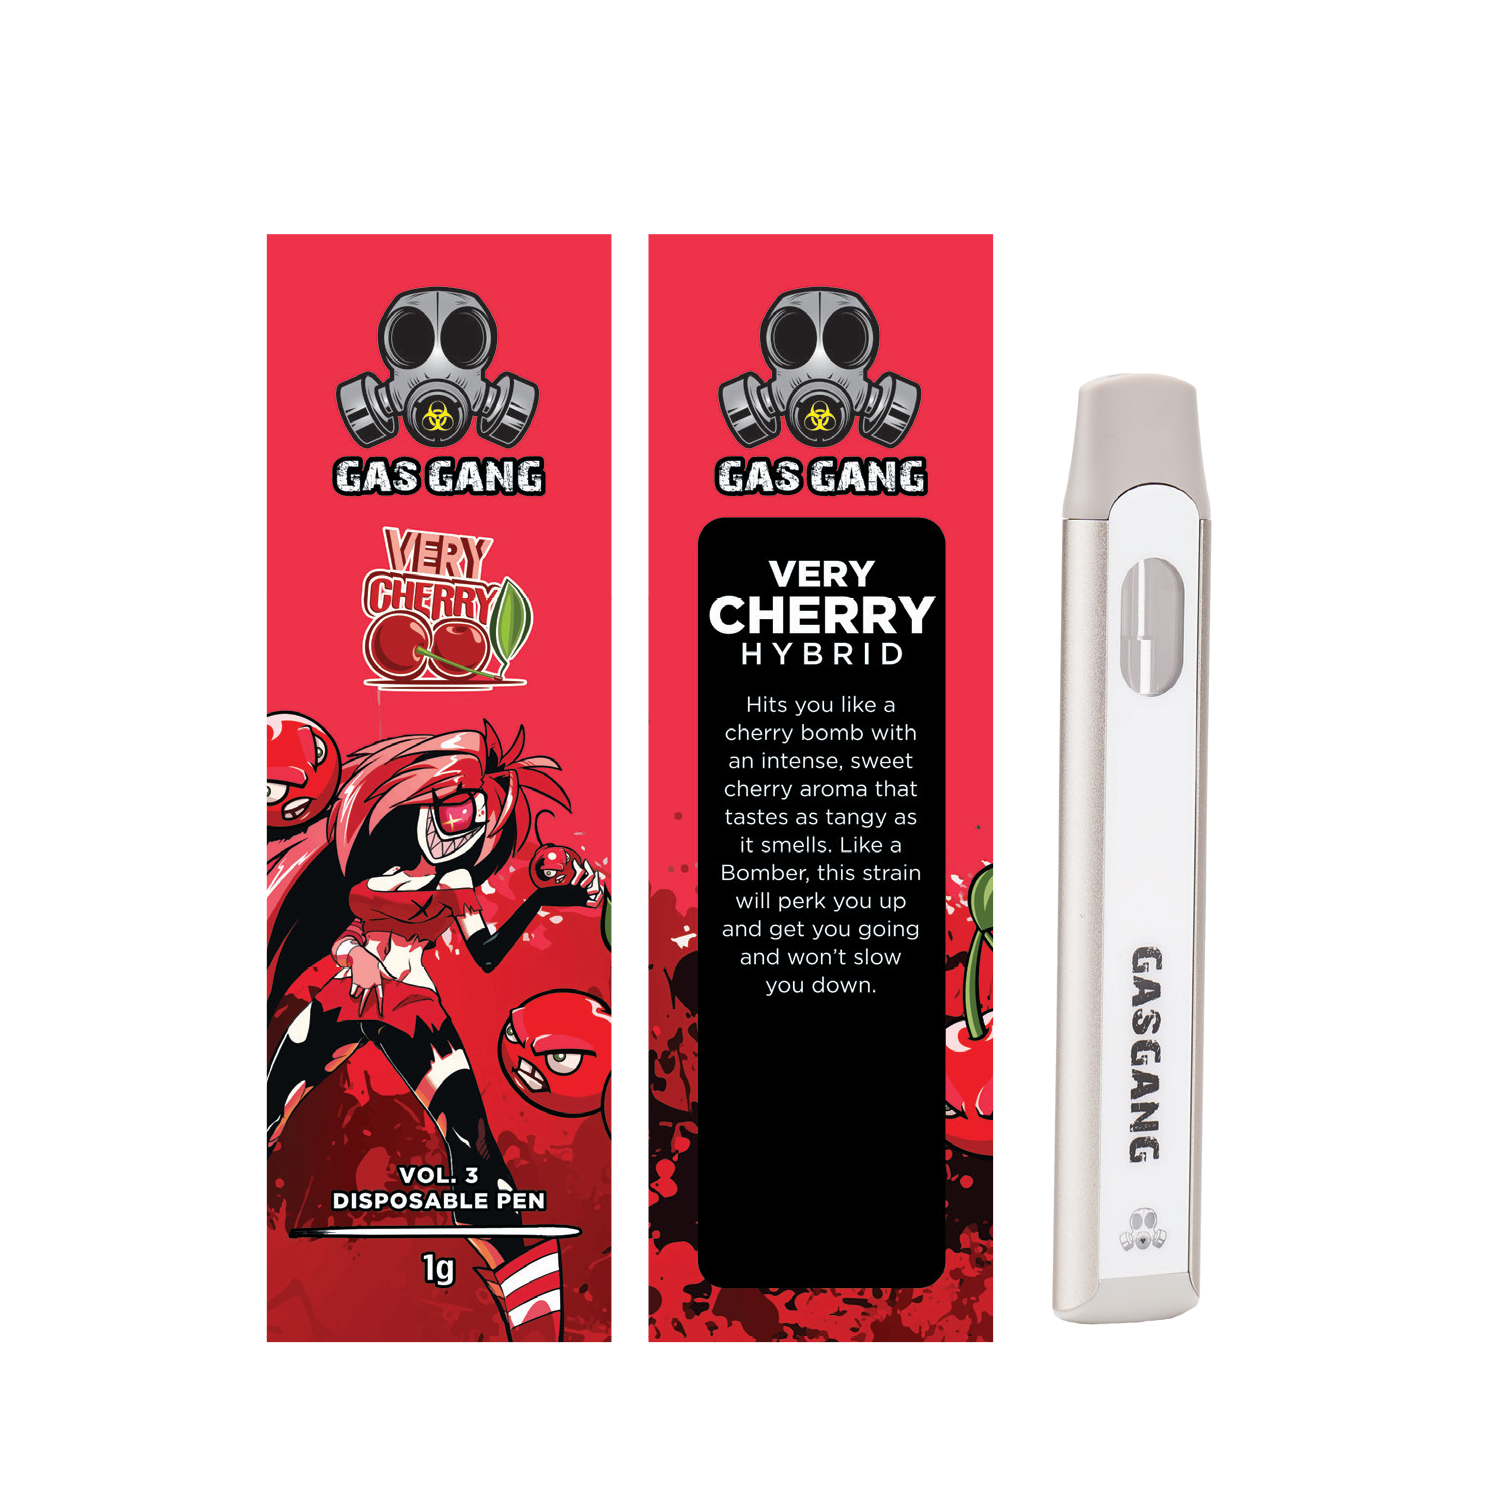 Buy Gas Gang - Very Cherry Disposable Pen at Wccannabis Online Shop